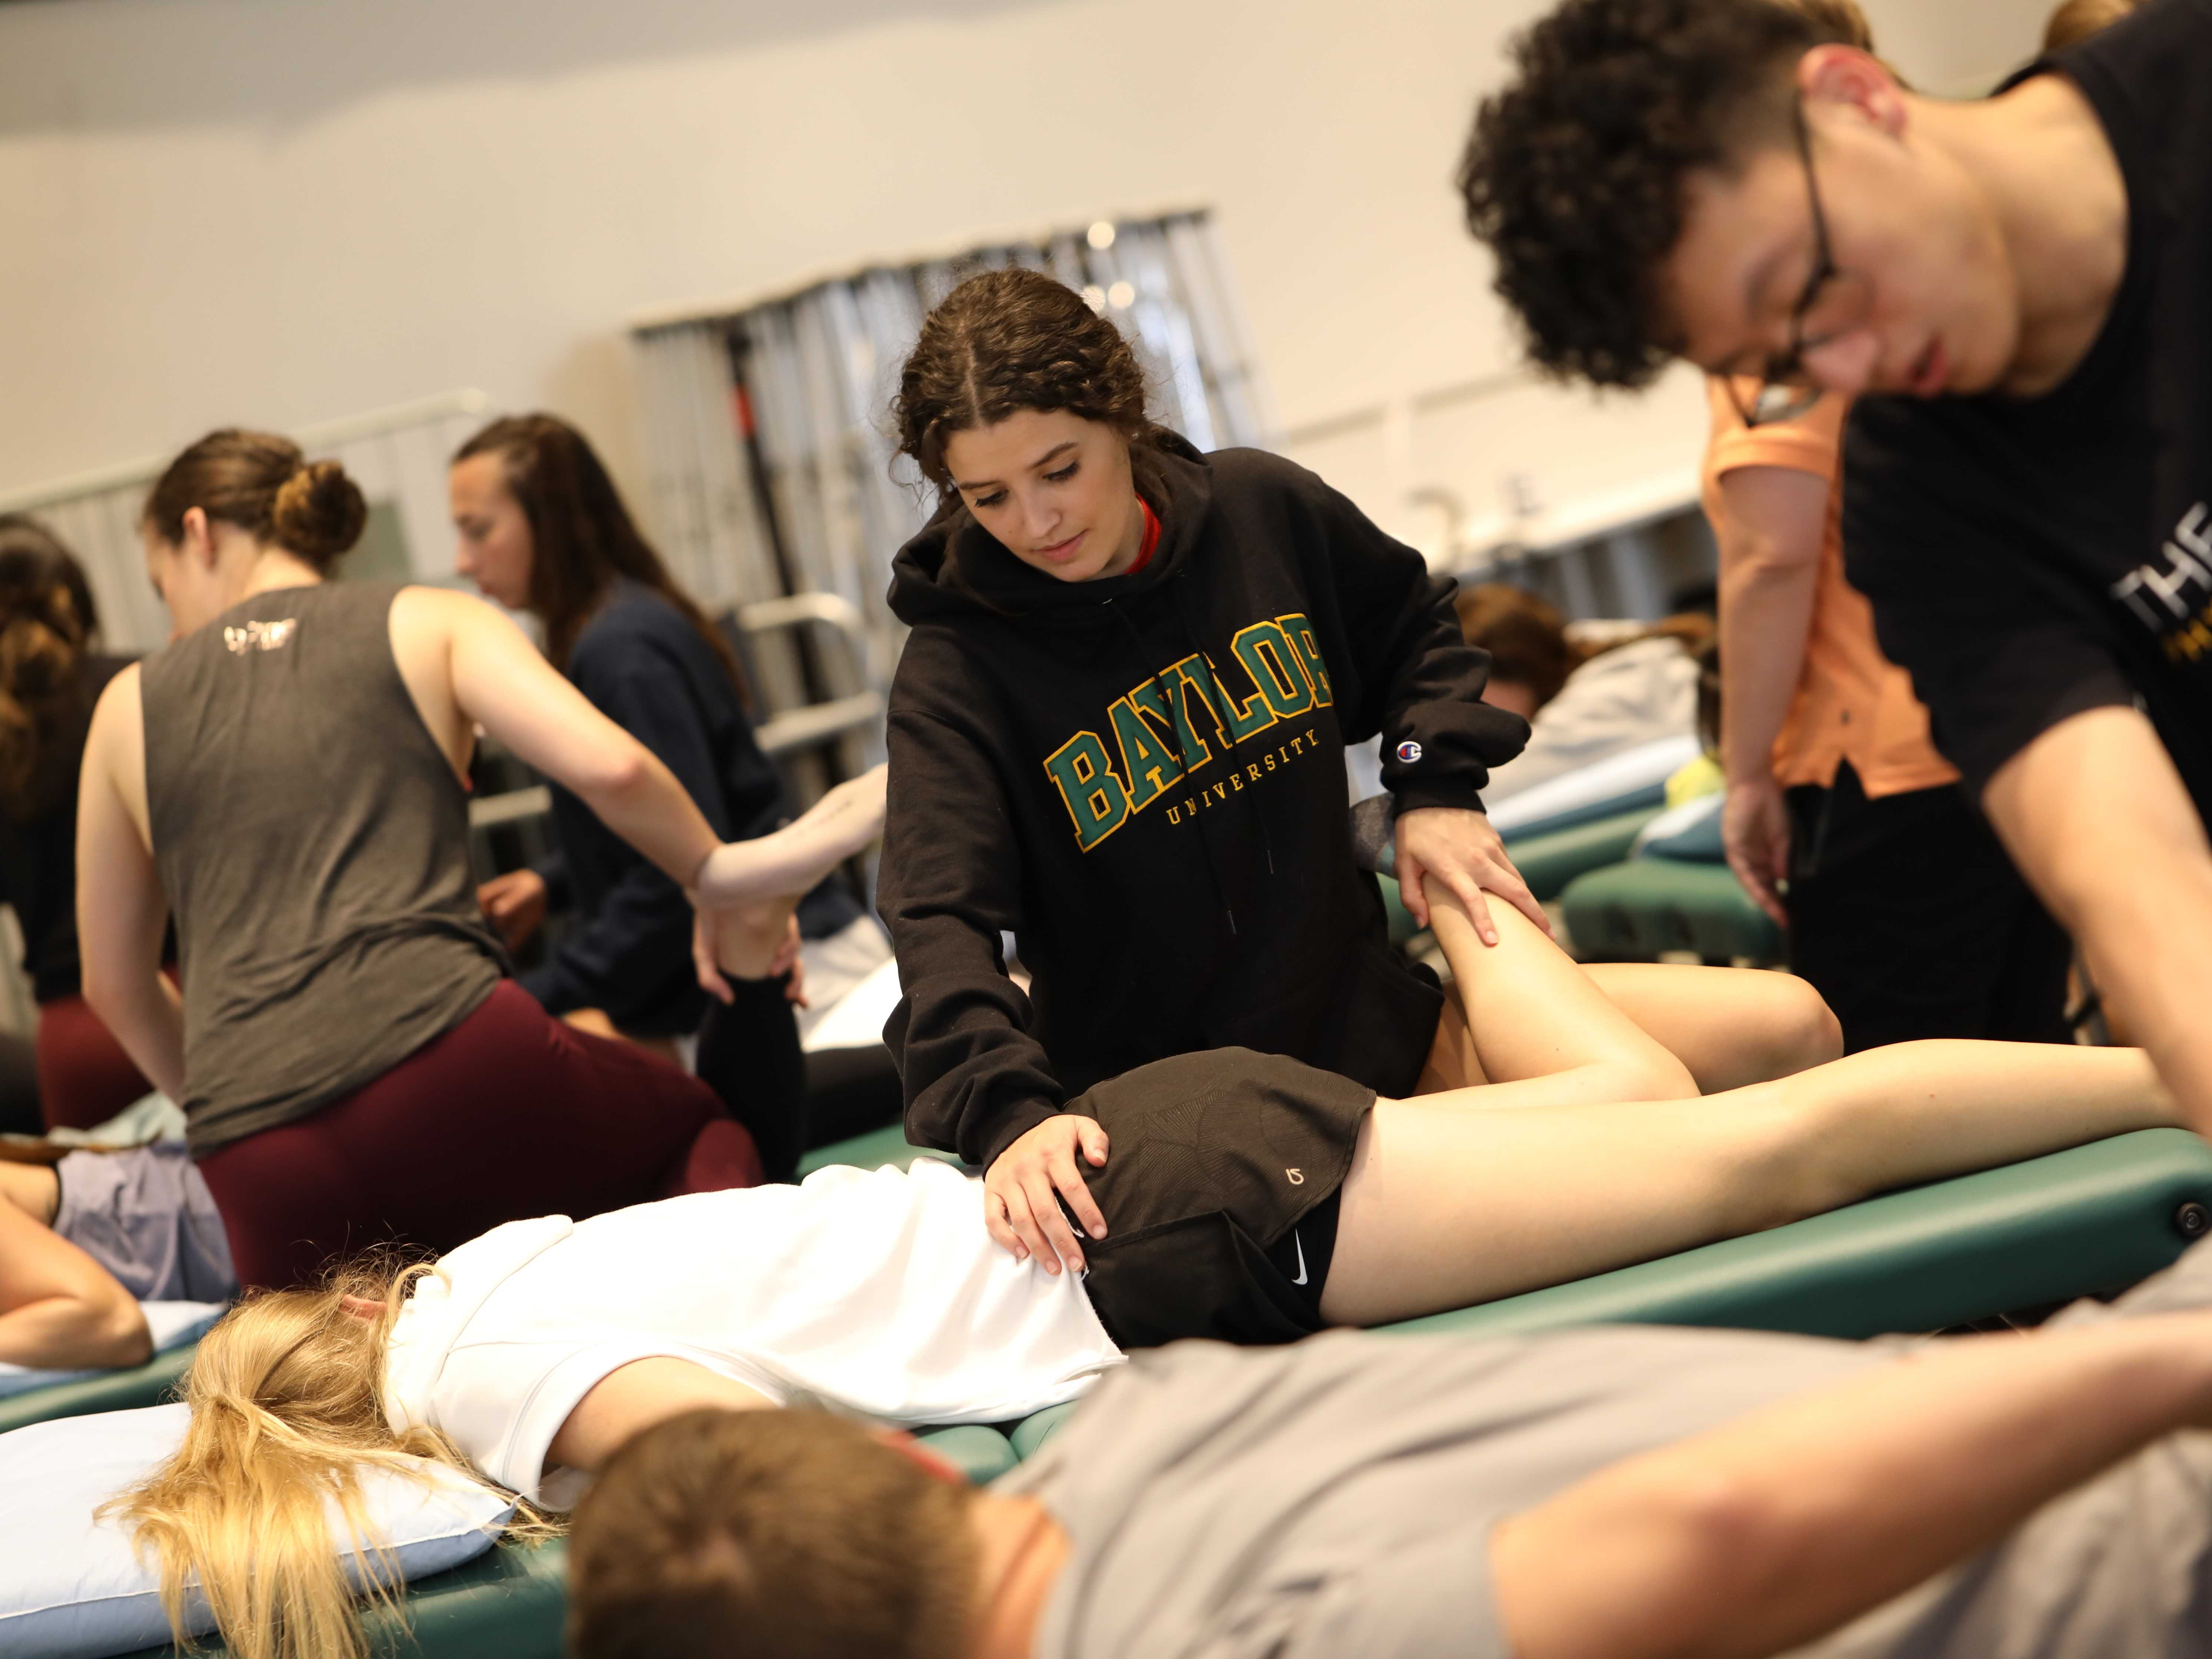 Baylor occupational and physical therapy students work with patients to practice their therapy practices.